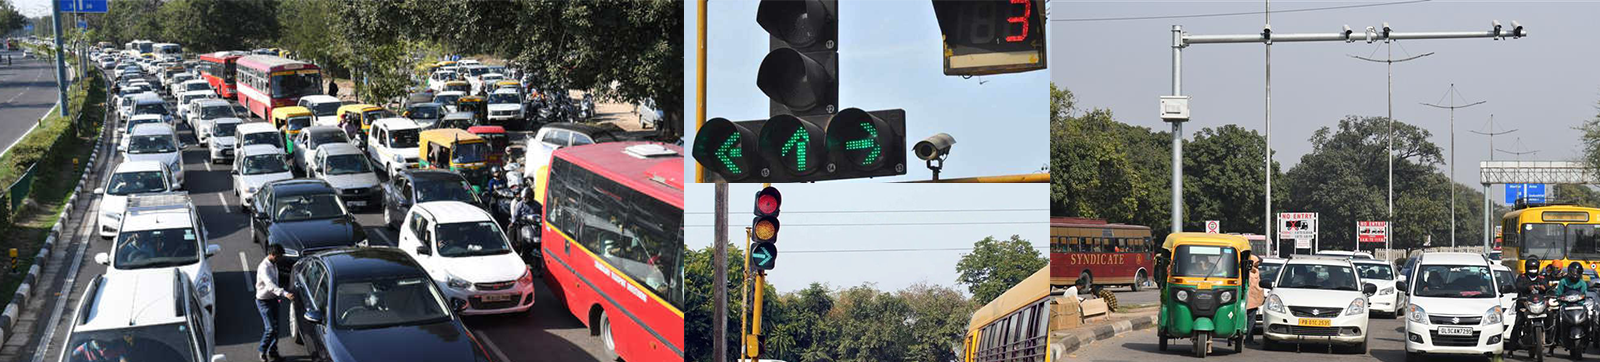 ‘Time Skip’ System Soon to Ease Traffic Congestion on Chandigarh Roads